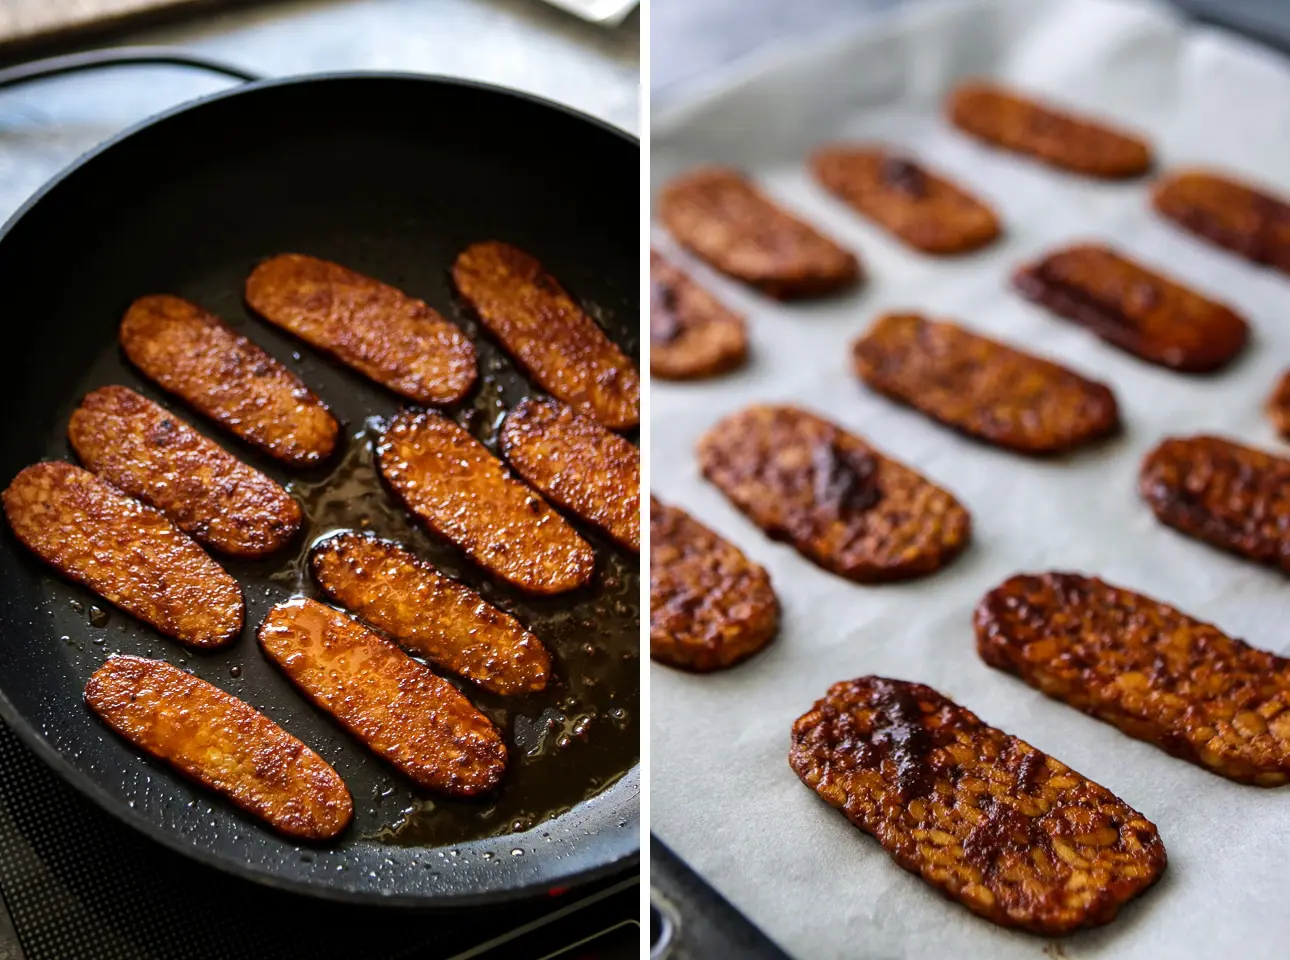 Marinated Tempeh in a Frying Pan and on a Baking Tray